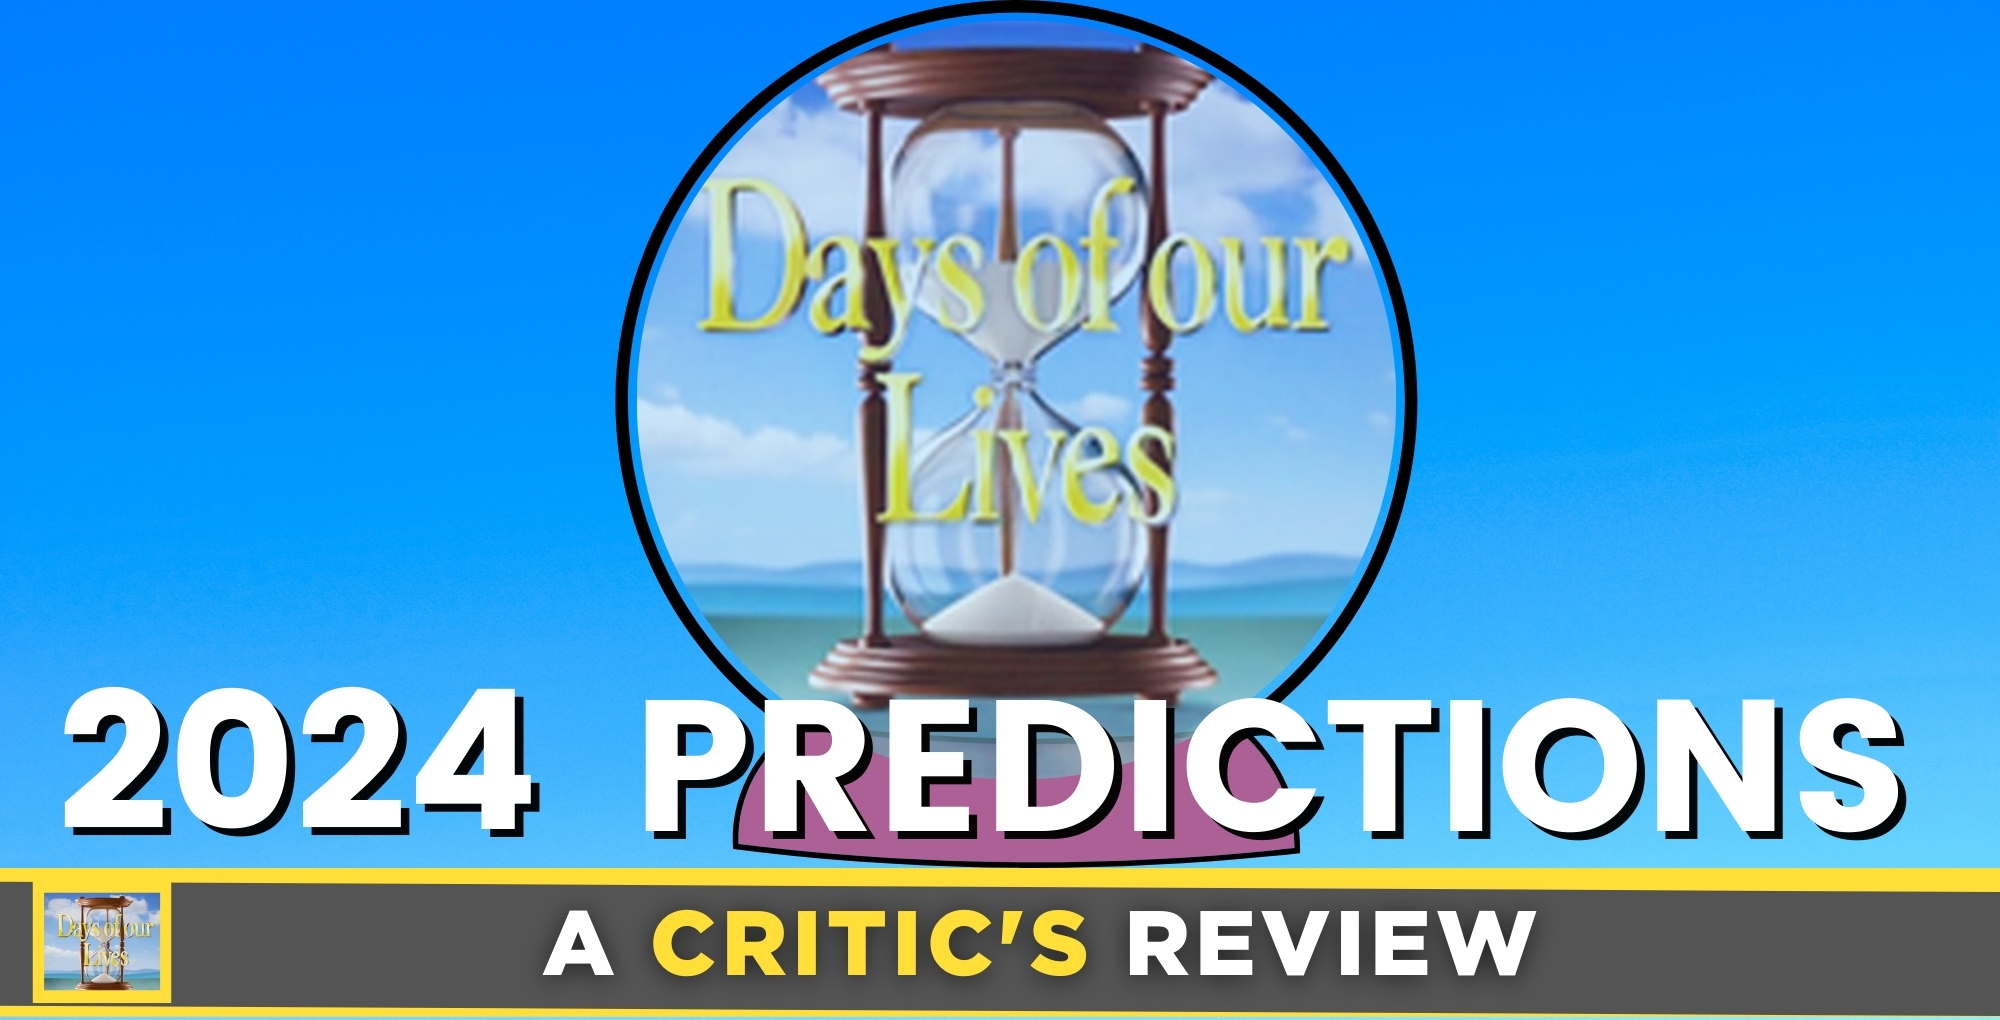 a critic's review of days of our lives, predictions for 2024.